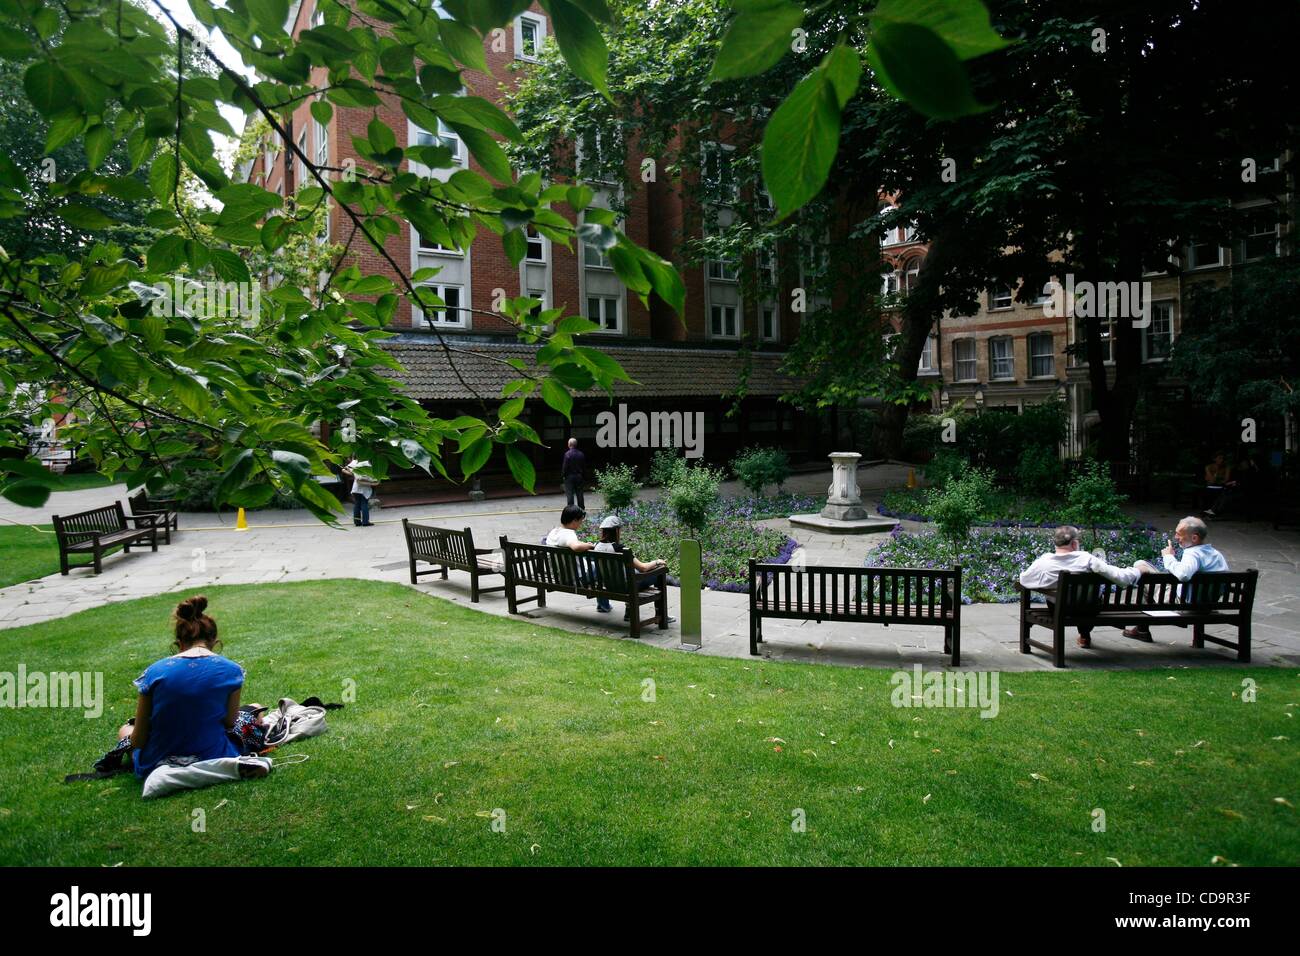 Jul 20, 2010 - London, England, United Kingdom - Commemorative tiles remind visitors of Postman's Park of heroic and tragic end of many lives. Postman's Park is a quiet spot in a middle of busy central London, near St. Paul's Cathedral. Postman's Park, King Edward Street, London. (Credit Image: Â© V Stock Photo